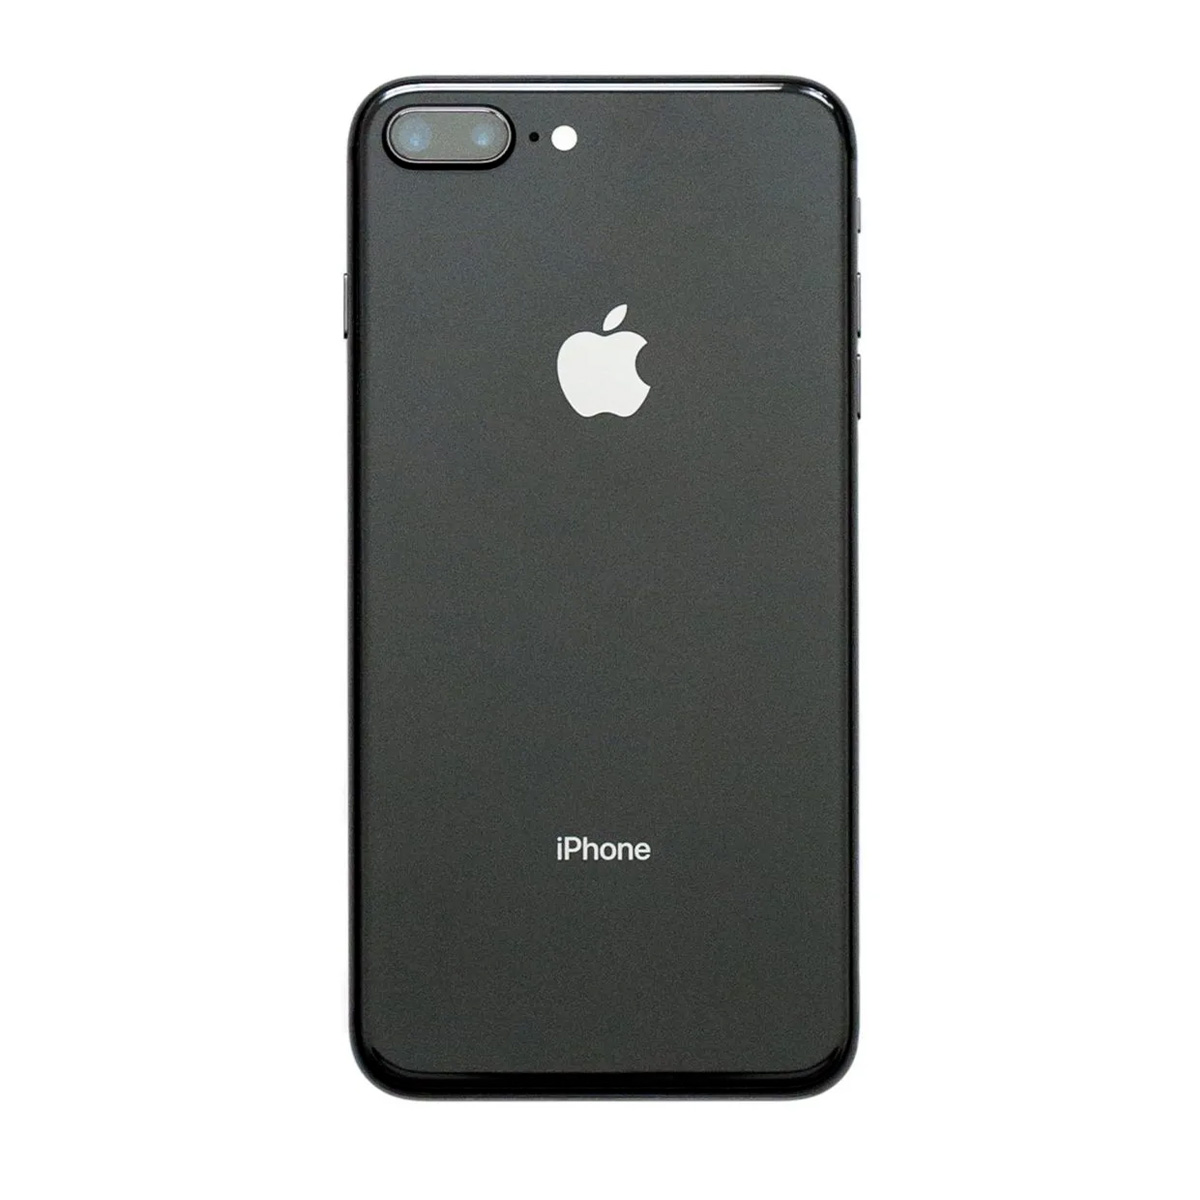 Featured image for “iPhone7 Plus 256GB ブラック MN6L2J／A SIM フリー”